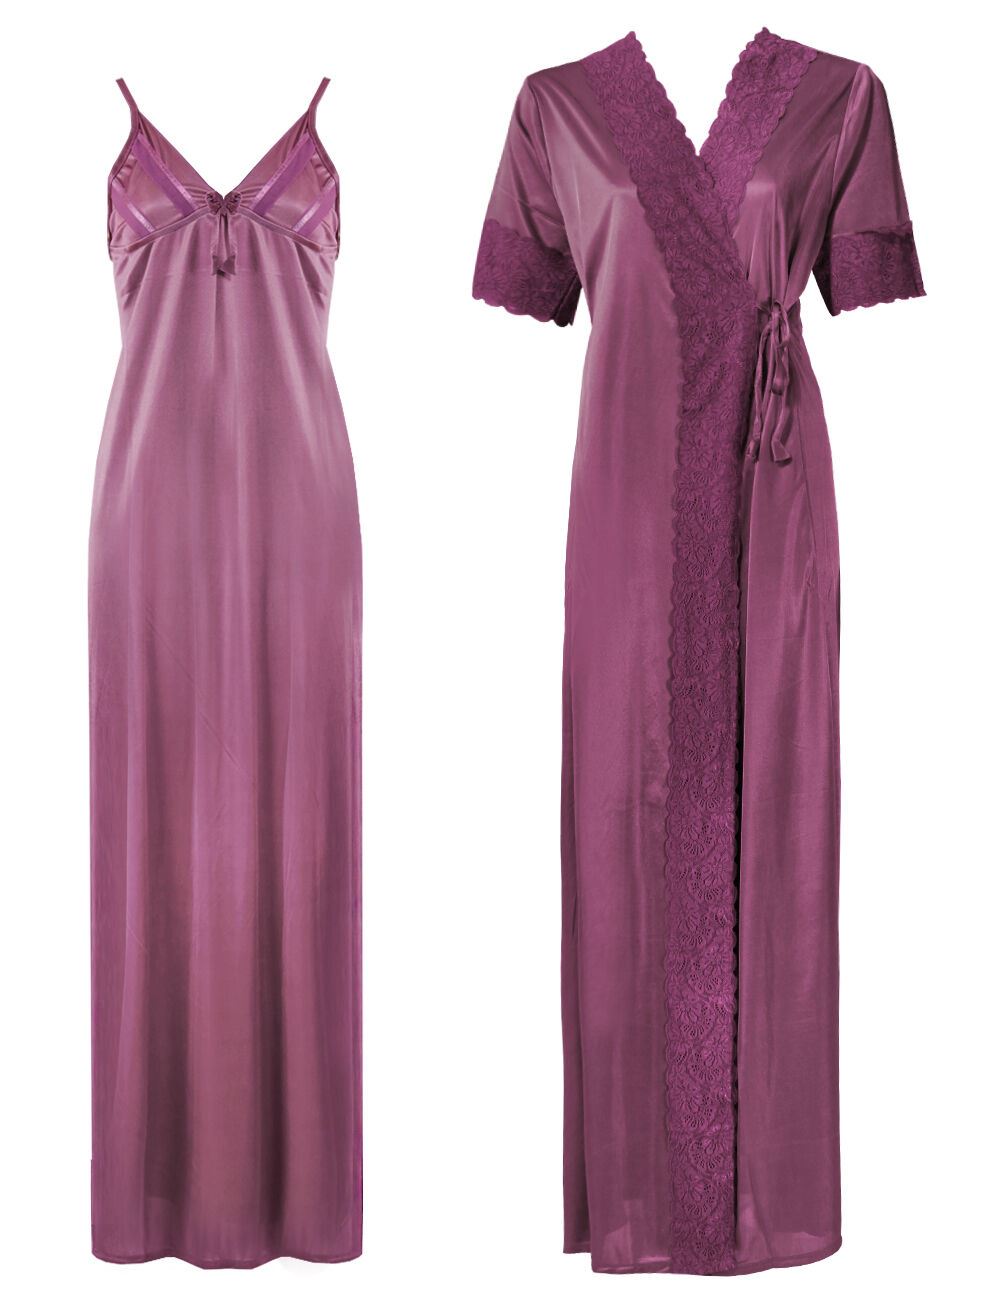 Light Purple / One Size: Regular (8-14) Satin Strappy Long Nighty With Dressing Gown / Robe The Orange Tags